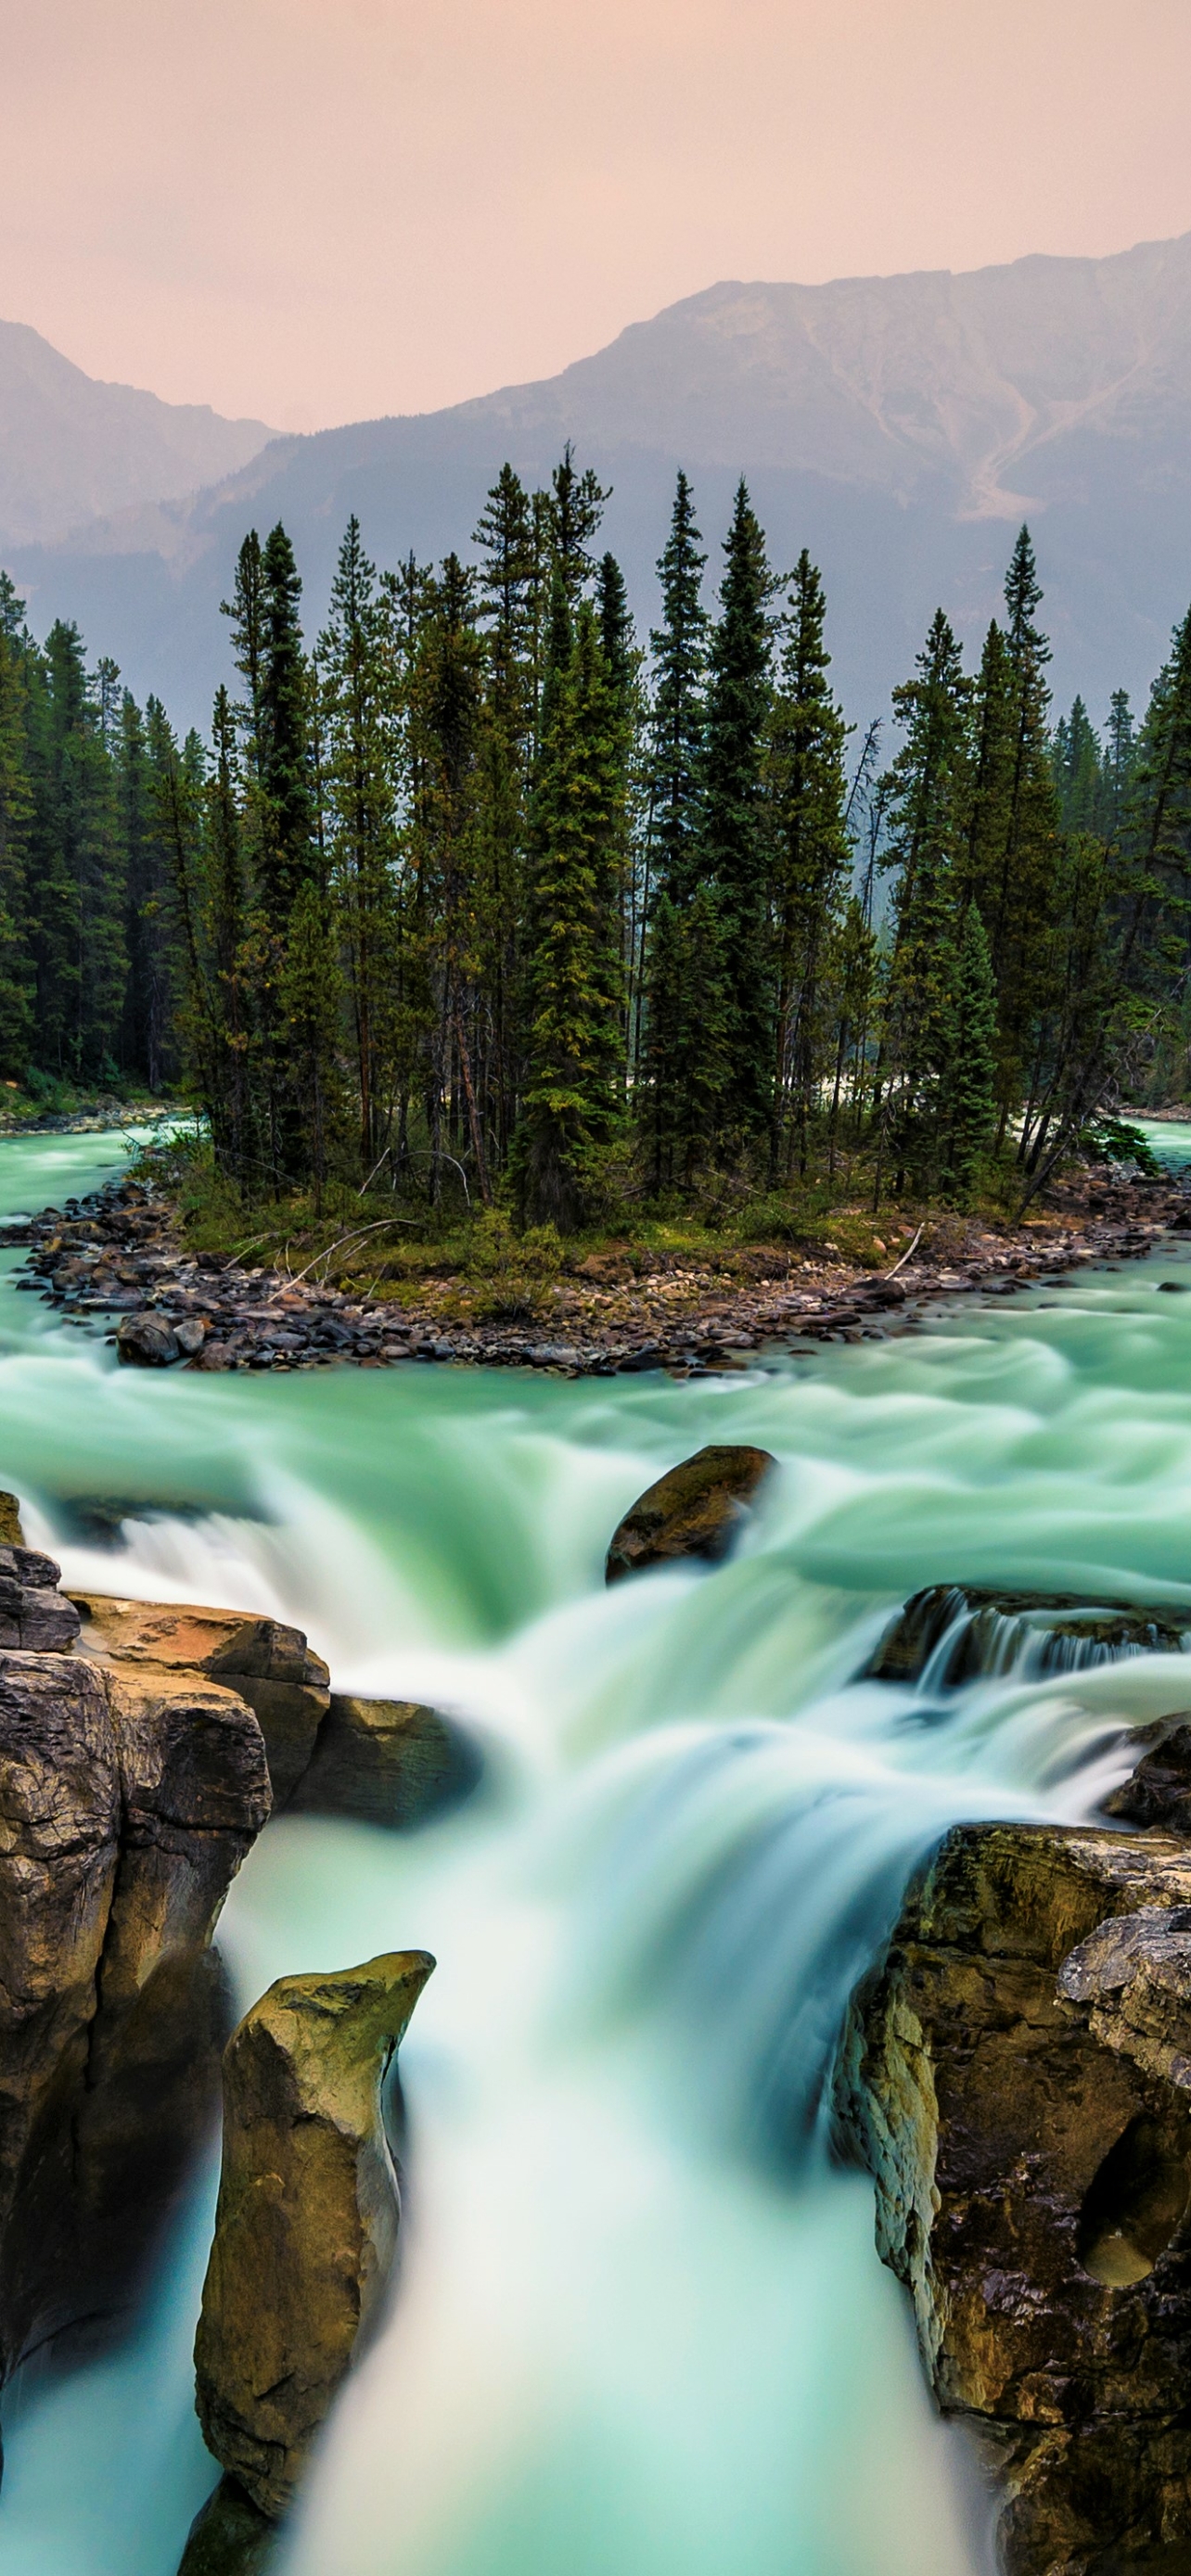 waterfalls, earth, waterfall, river, jasper national park, forest, canada, mountain